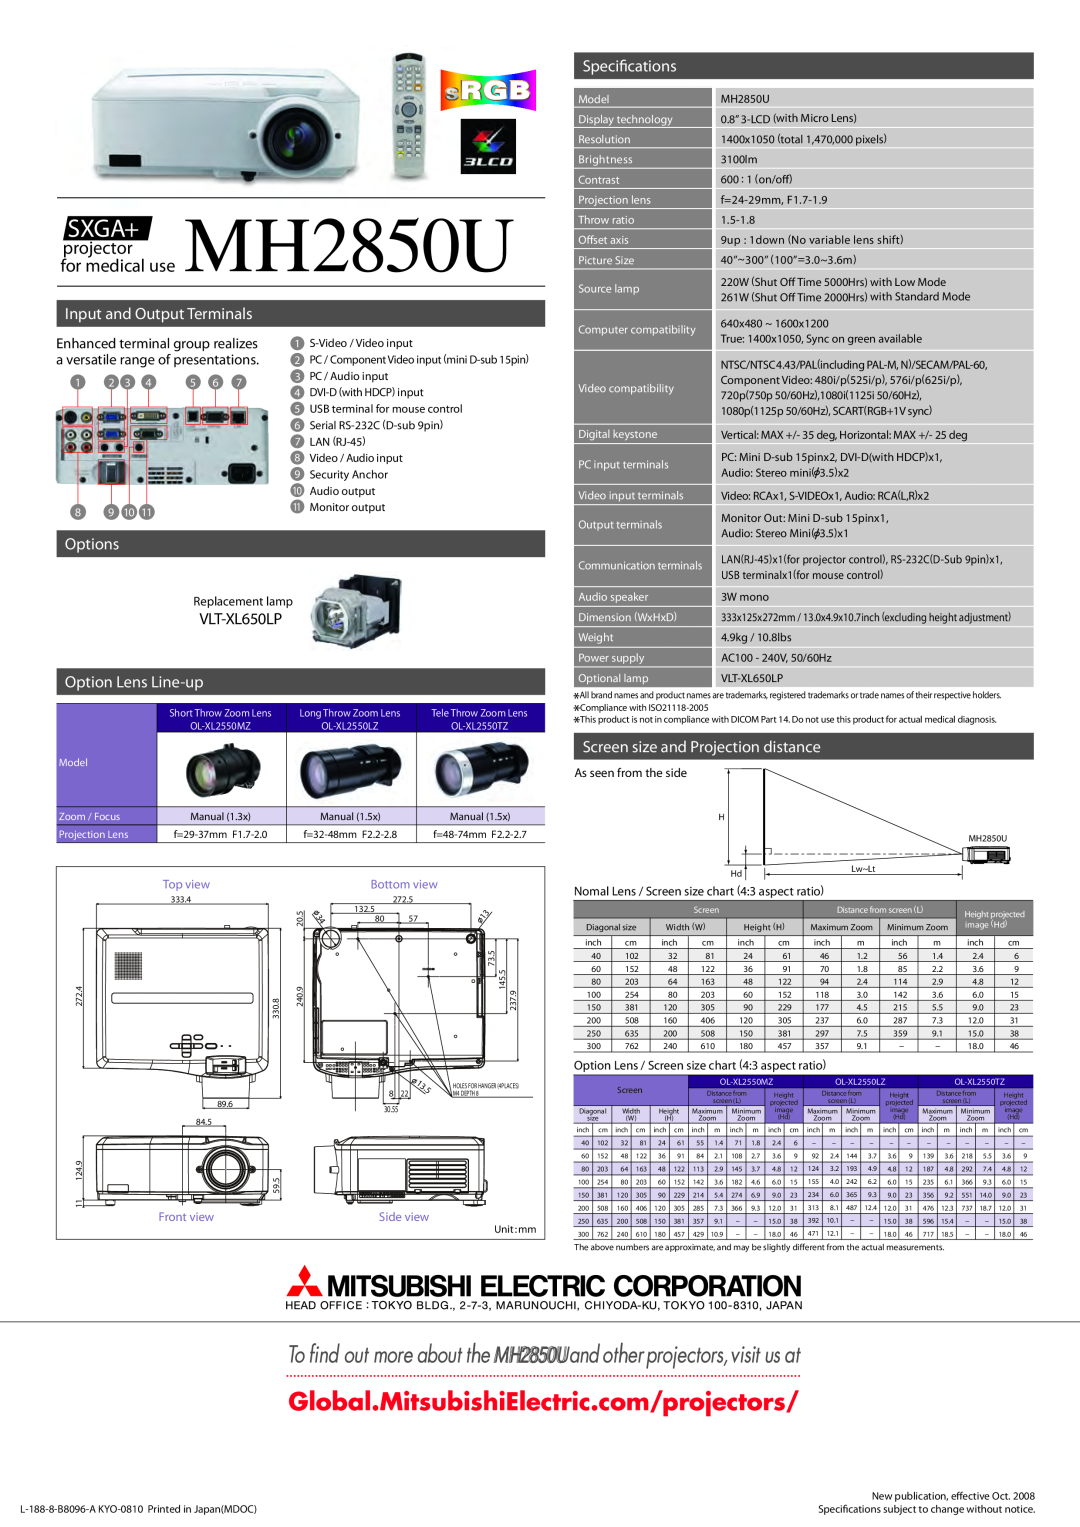 Mitsubishi Electronics SXGA+ MH2850U, projector, for medical use, Specications, Input and Output Terminals, Options 